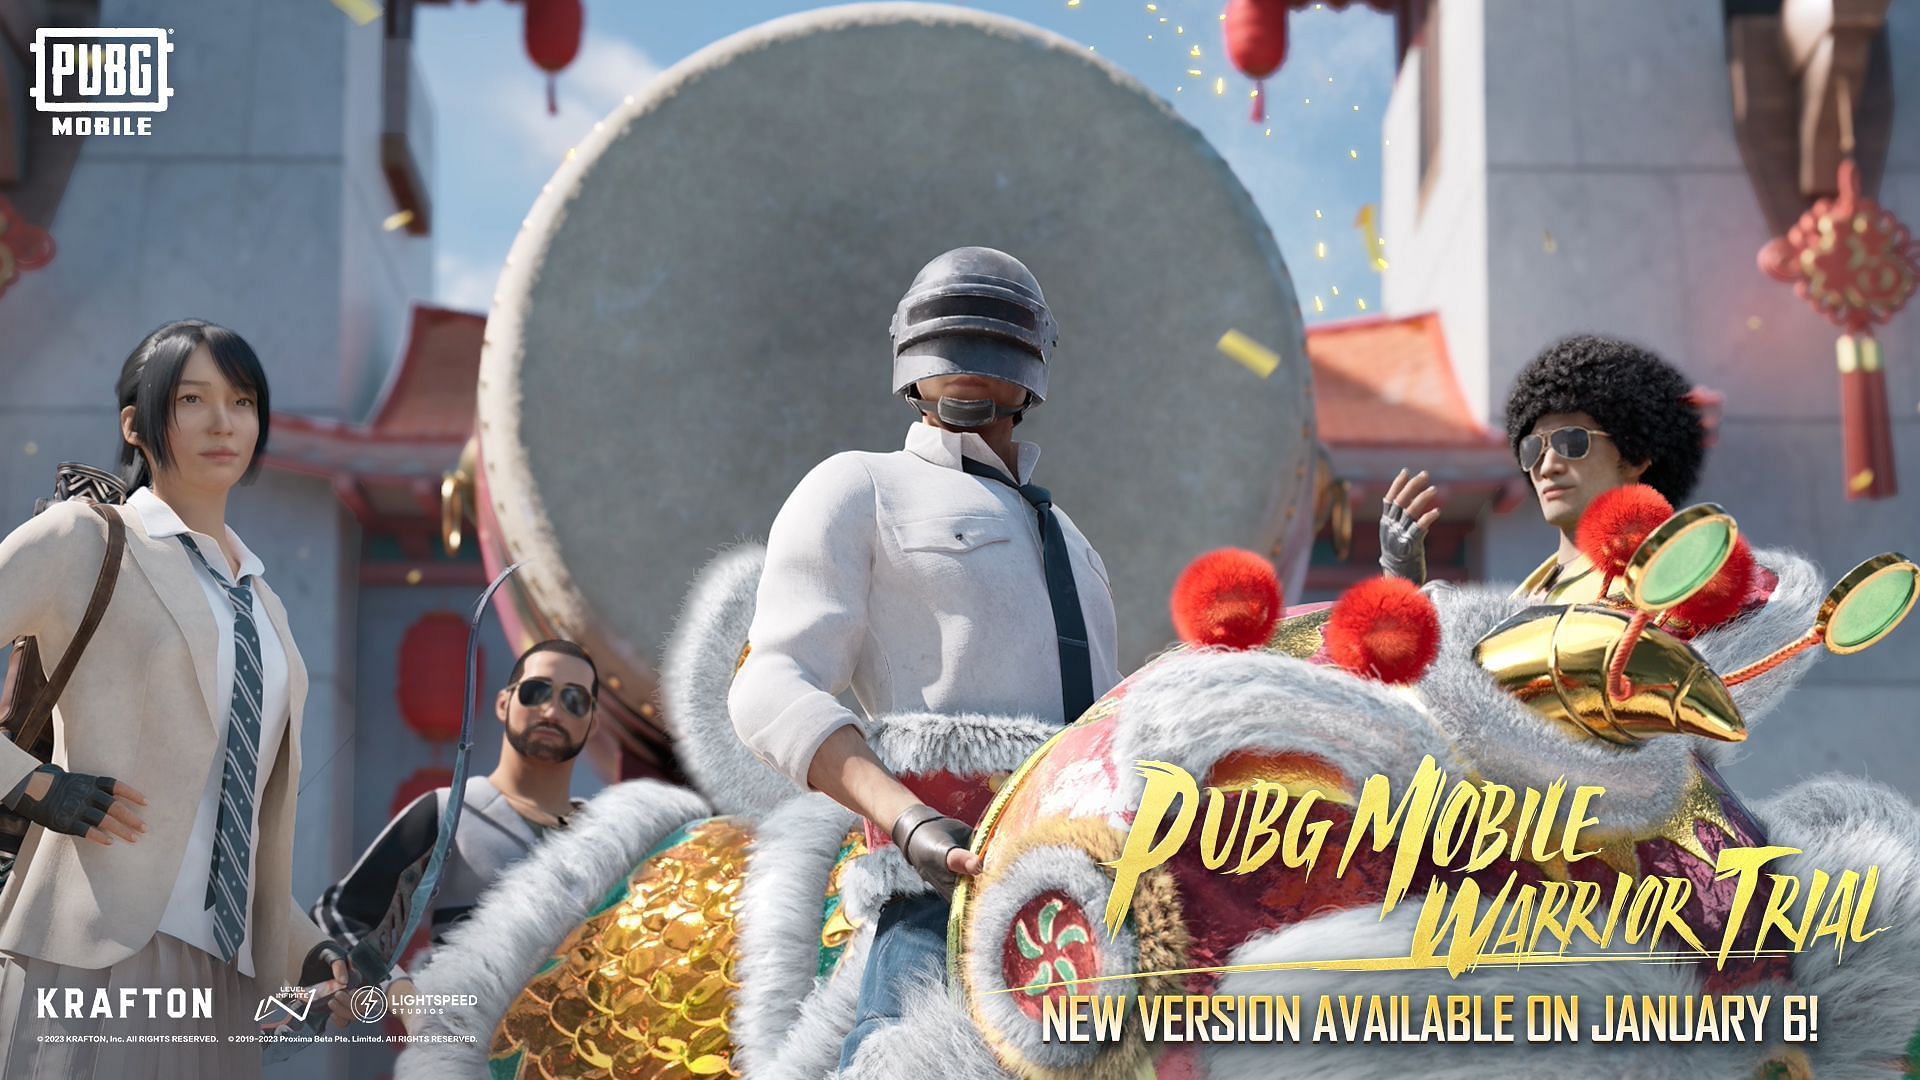 New PUBG Mobile 2.4 update has started rolling out (Image via Krafton)